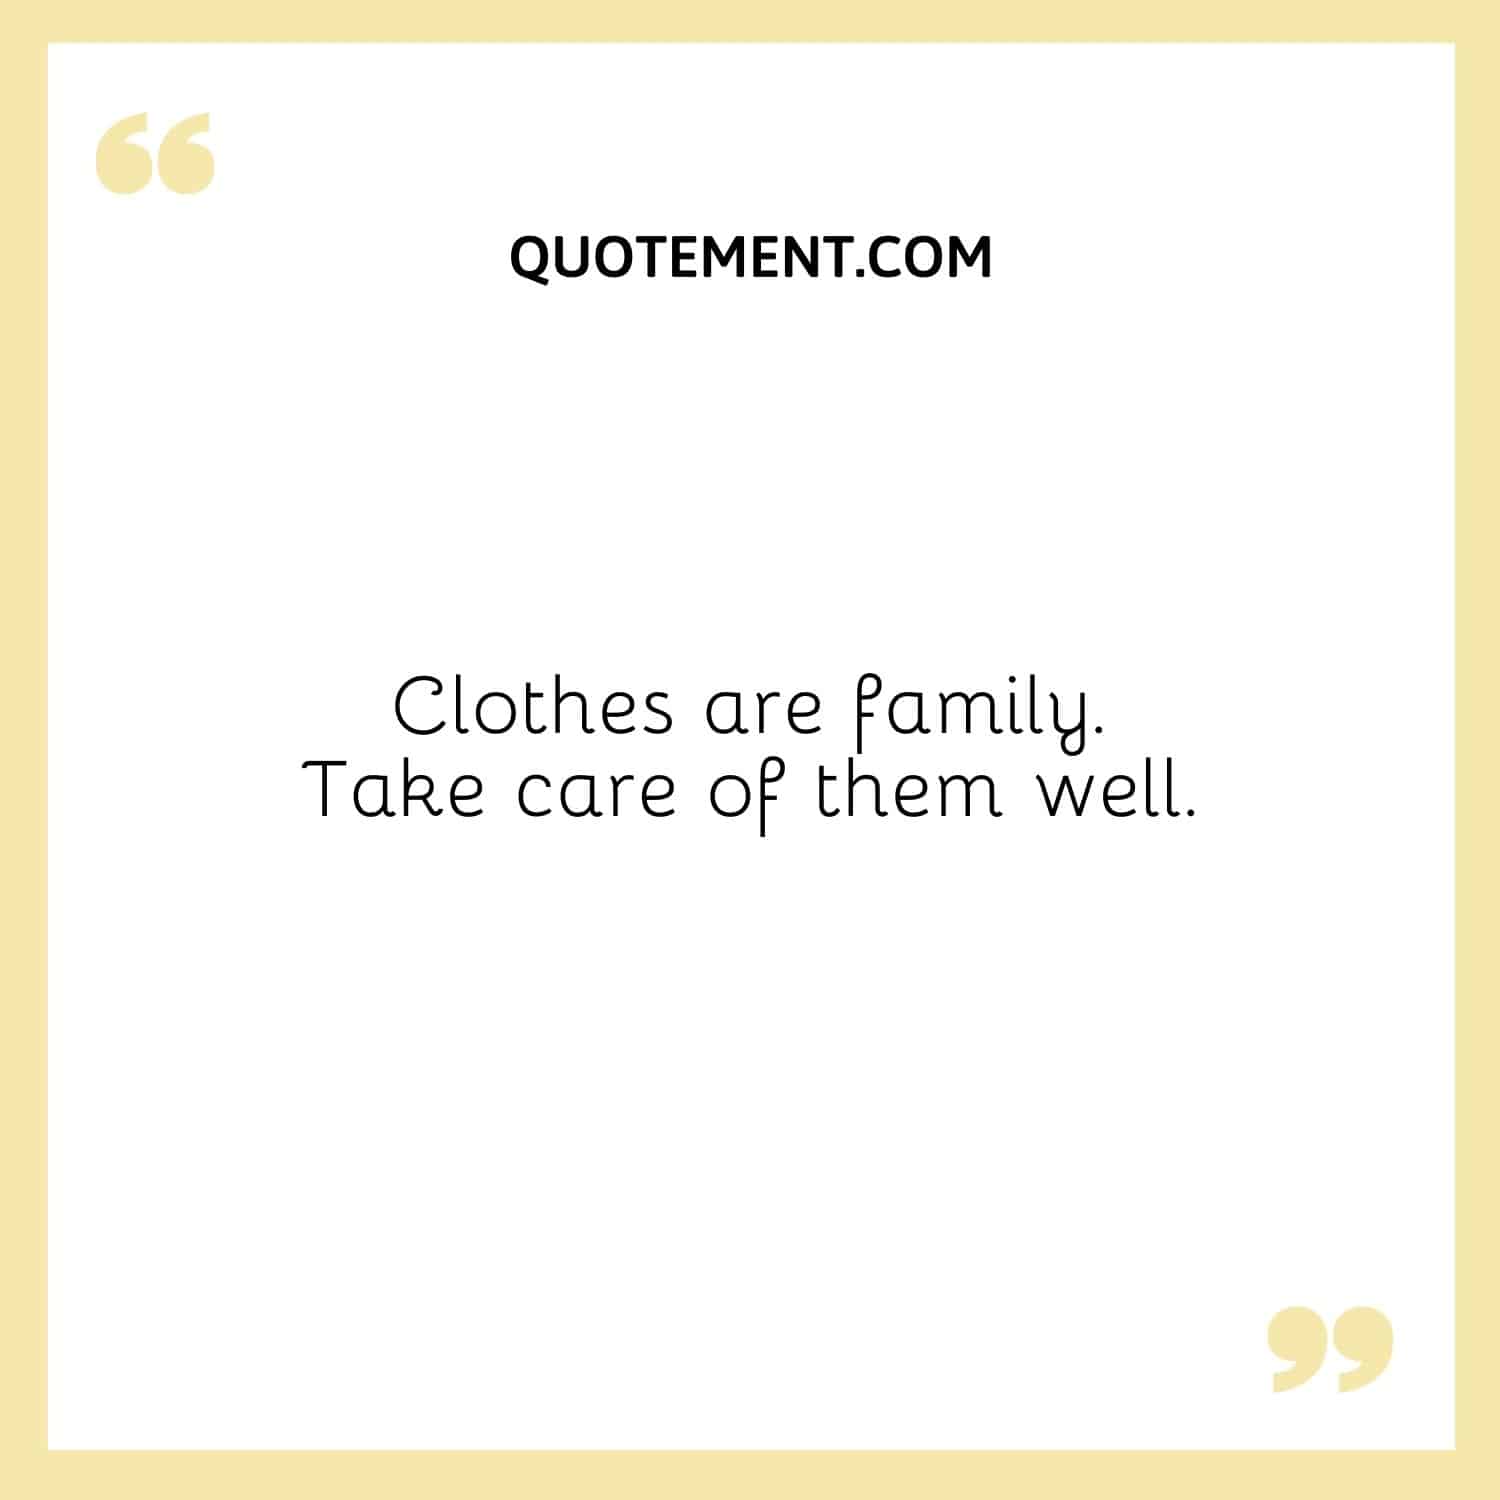 Clothes are family. Take care of them well.